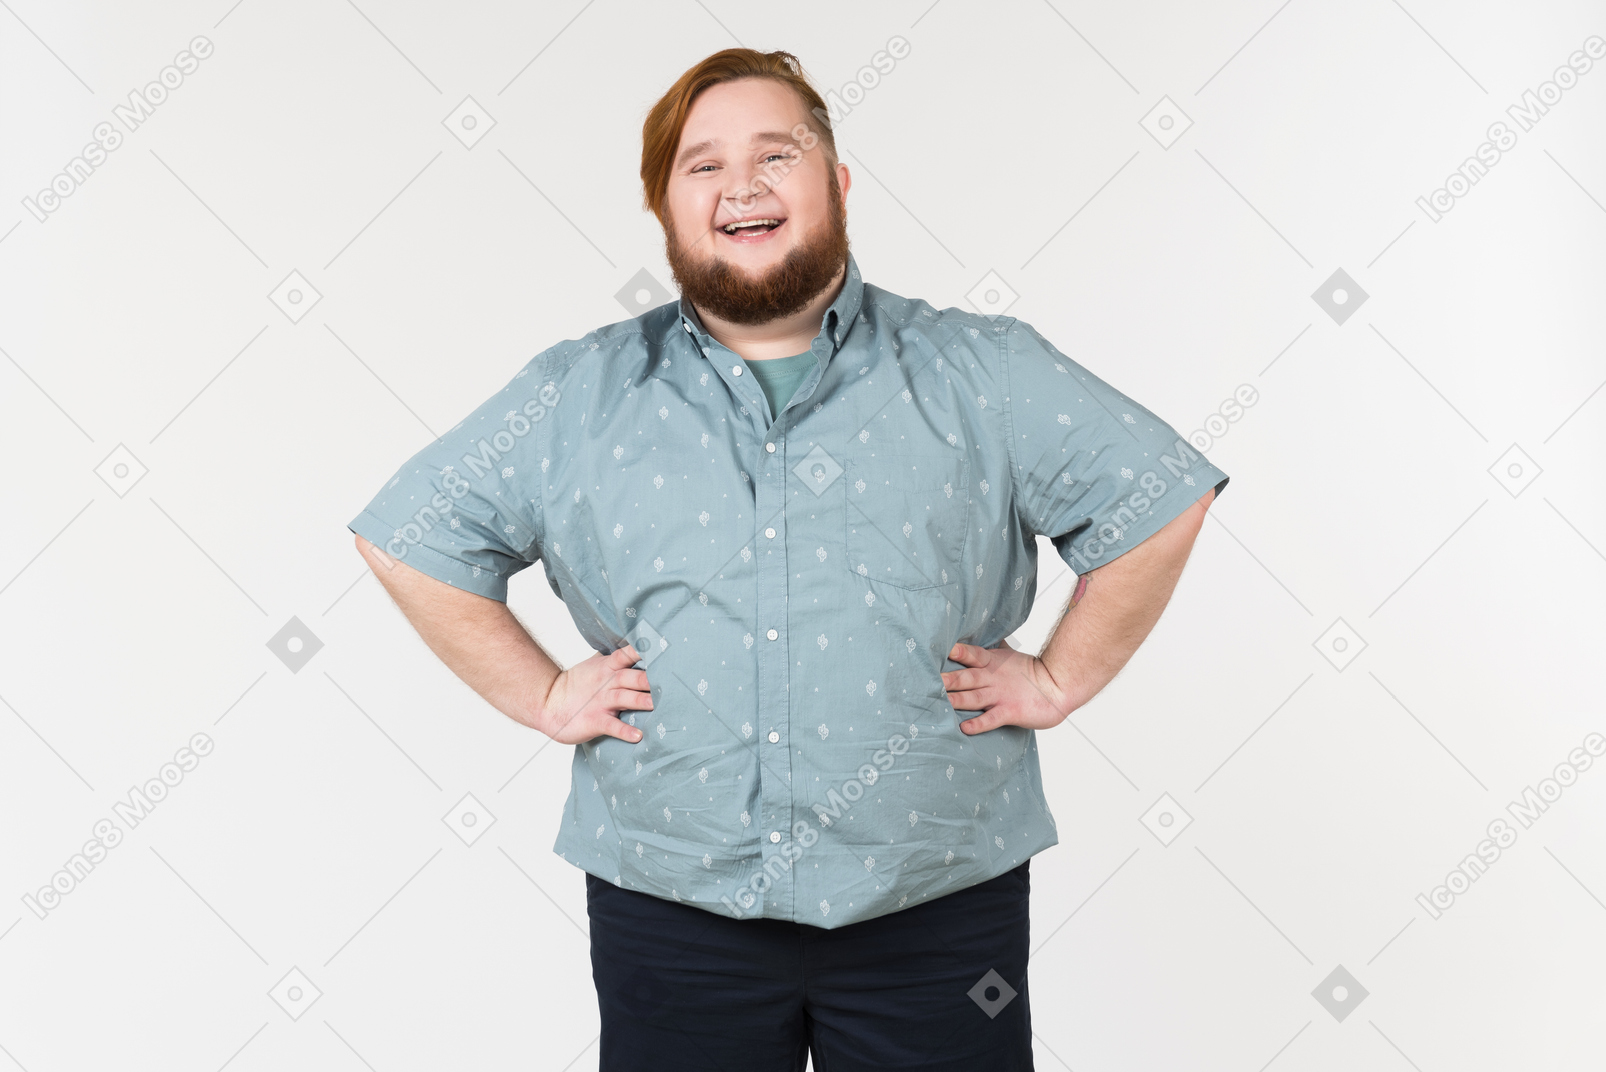 A fat man standing with his hands on his hips and laughing